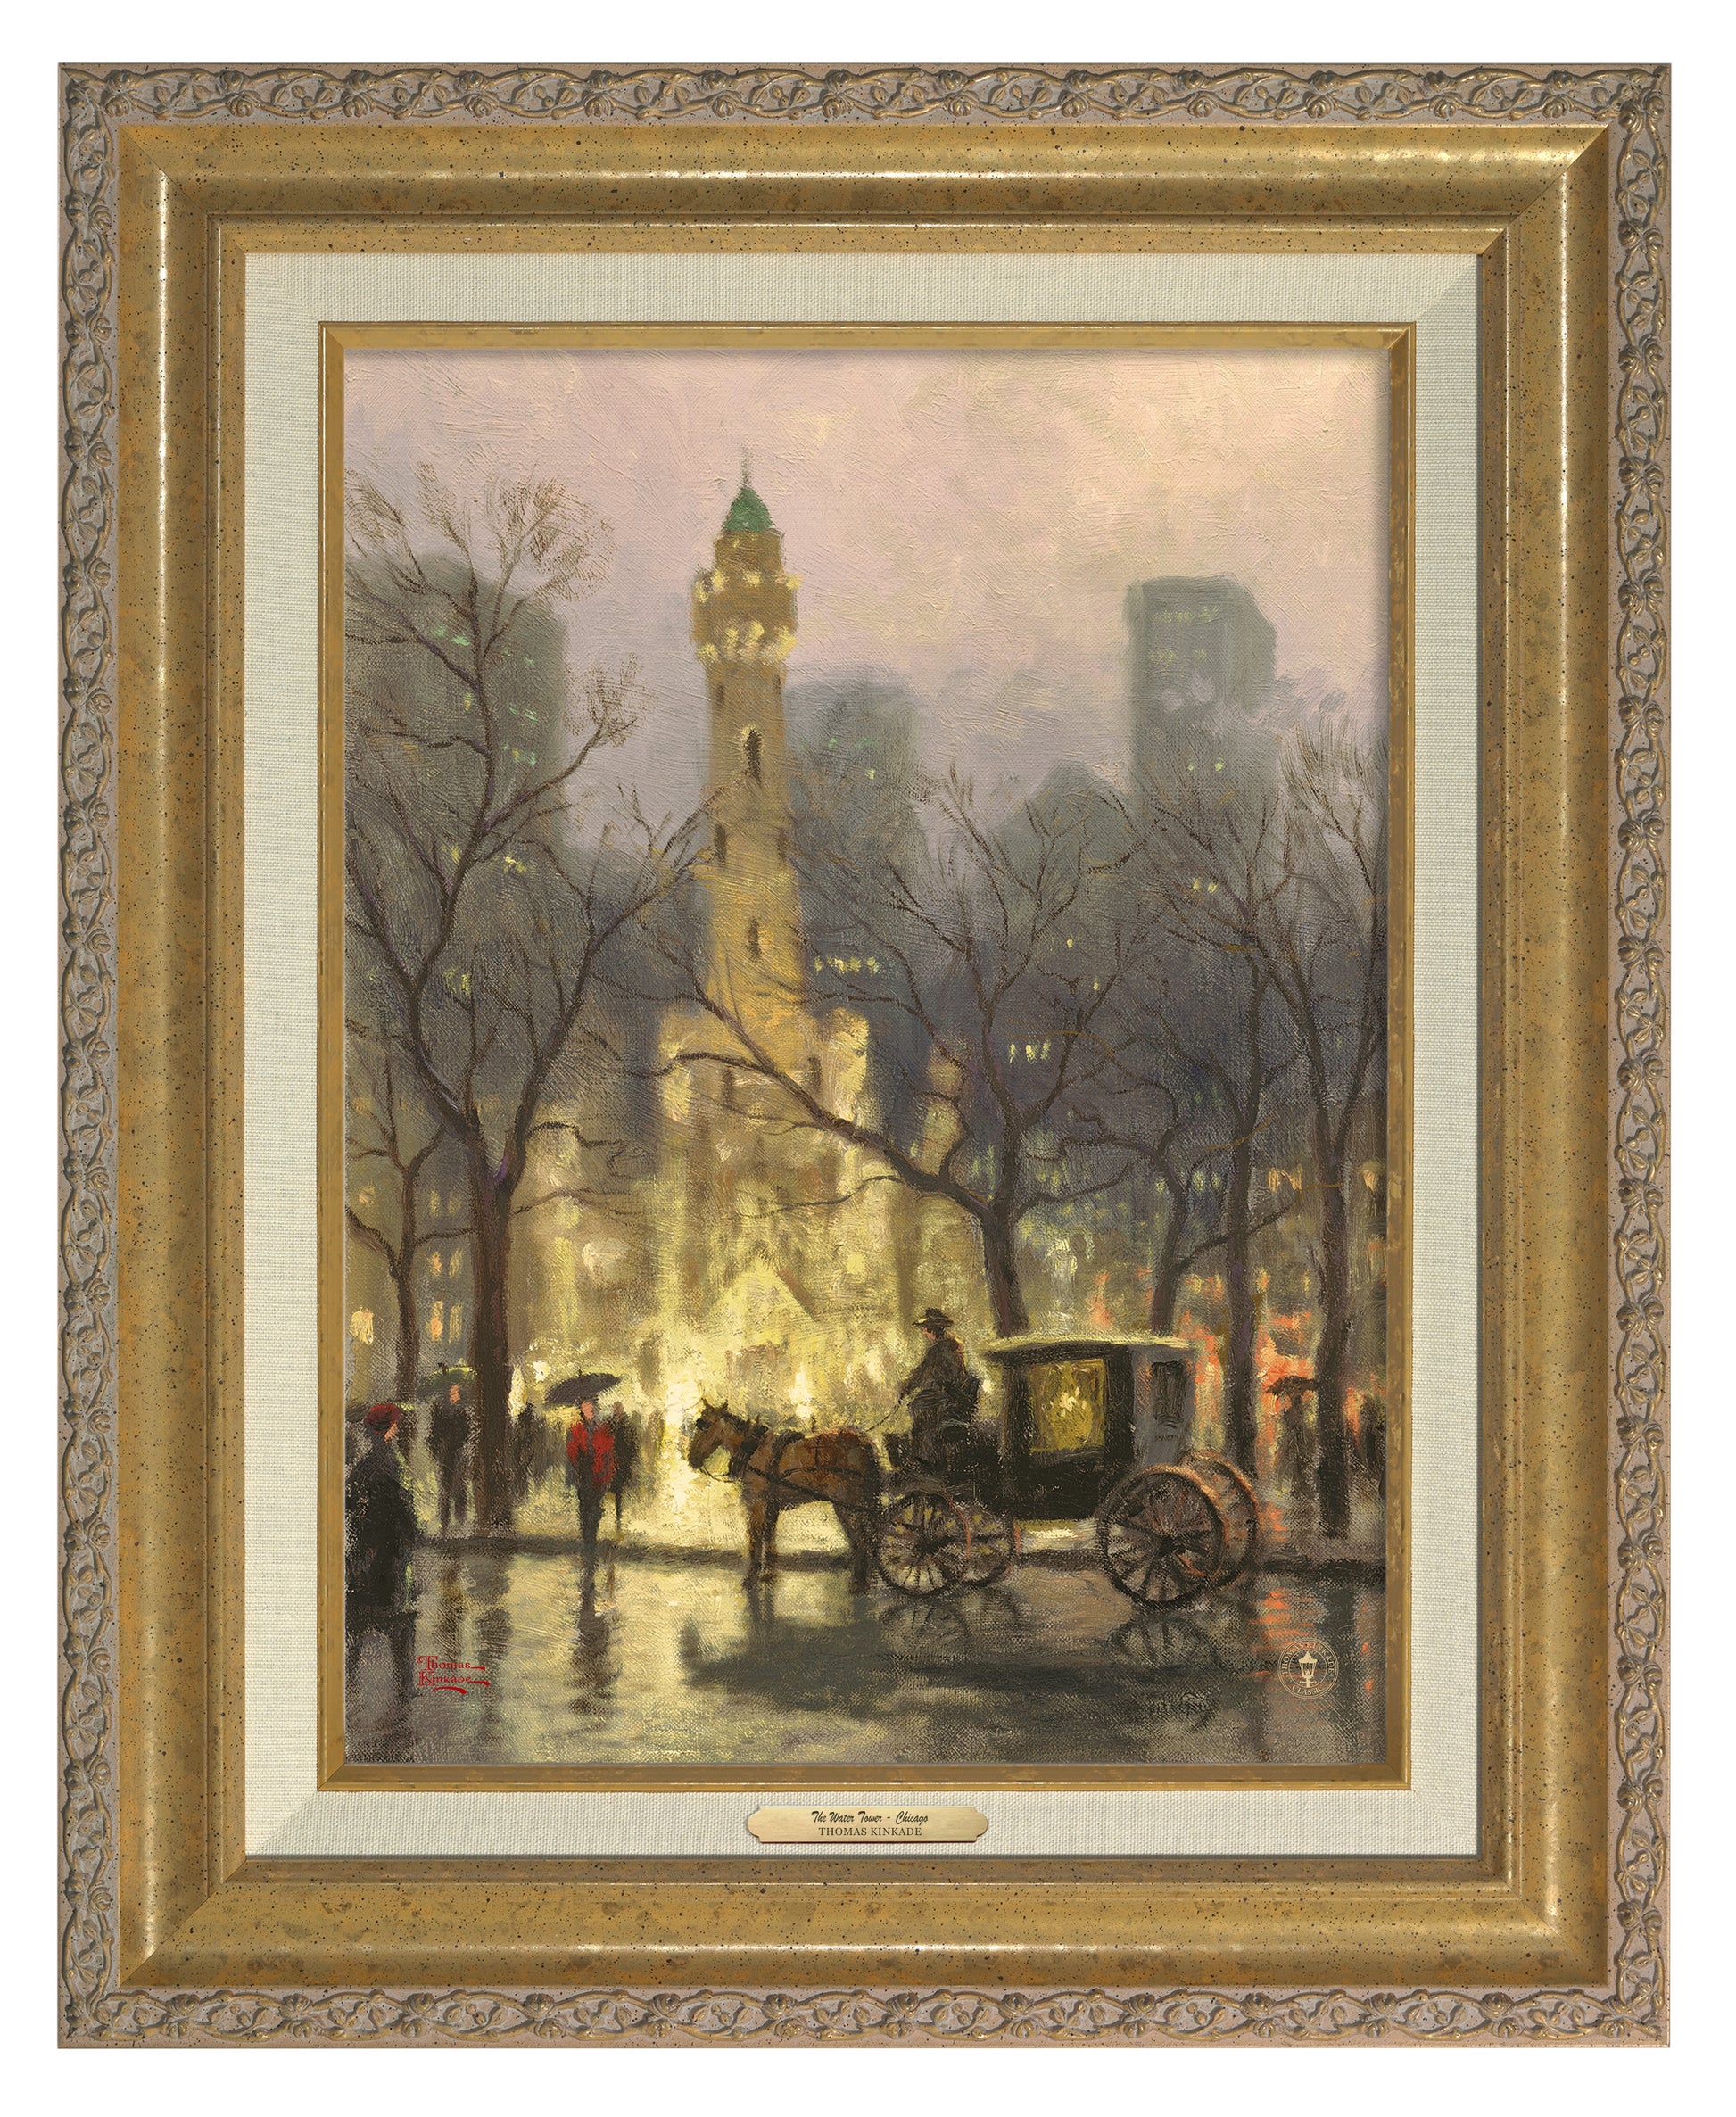 162171_The Water Tower_ Chicago_12x16_Gold_CLF VERTICAL.jpg